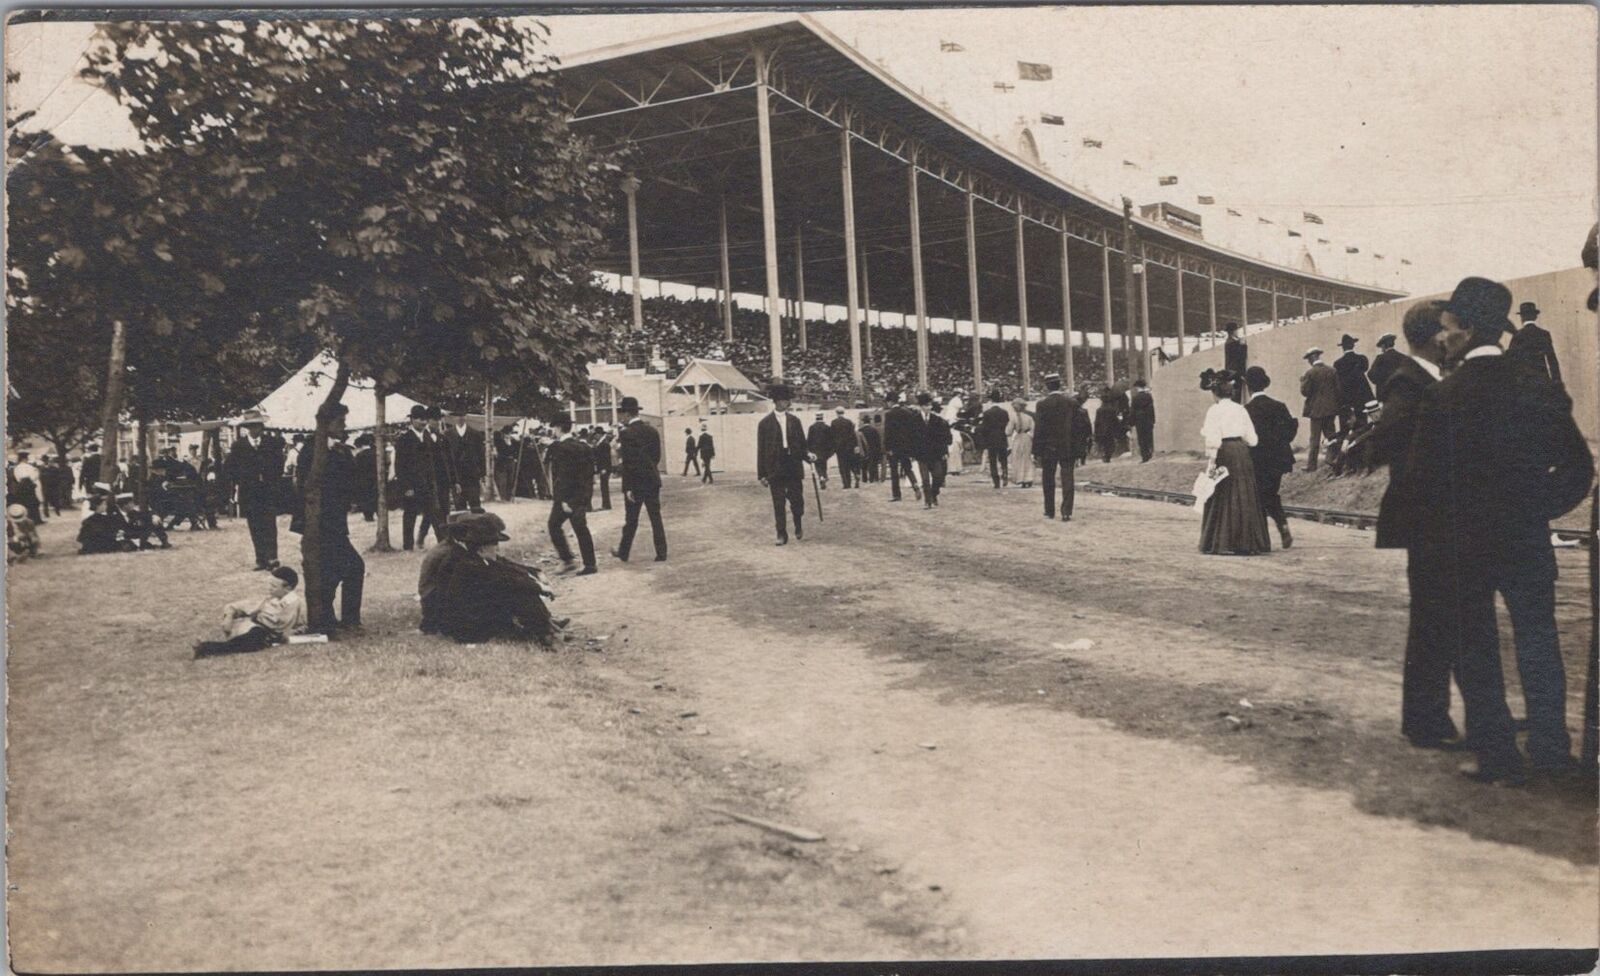 Crowds at Grandstand Canadian National Exhibition Toronto c1900s RPPC Postcard